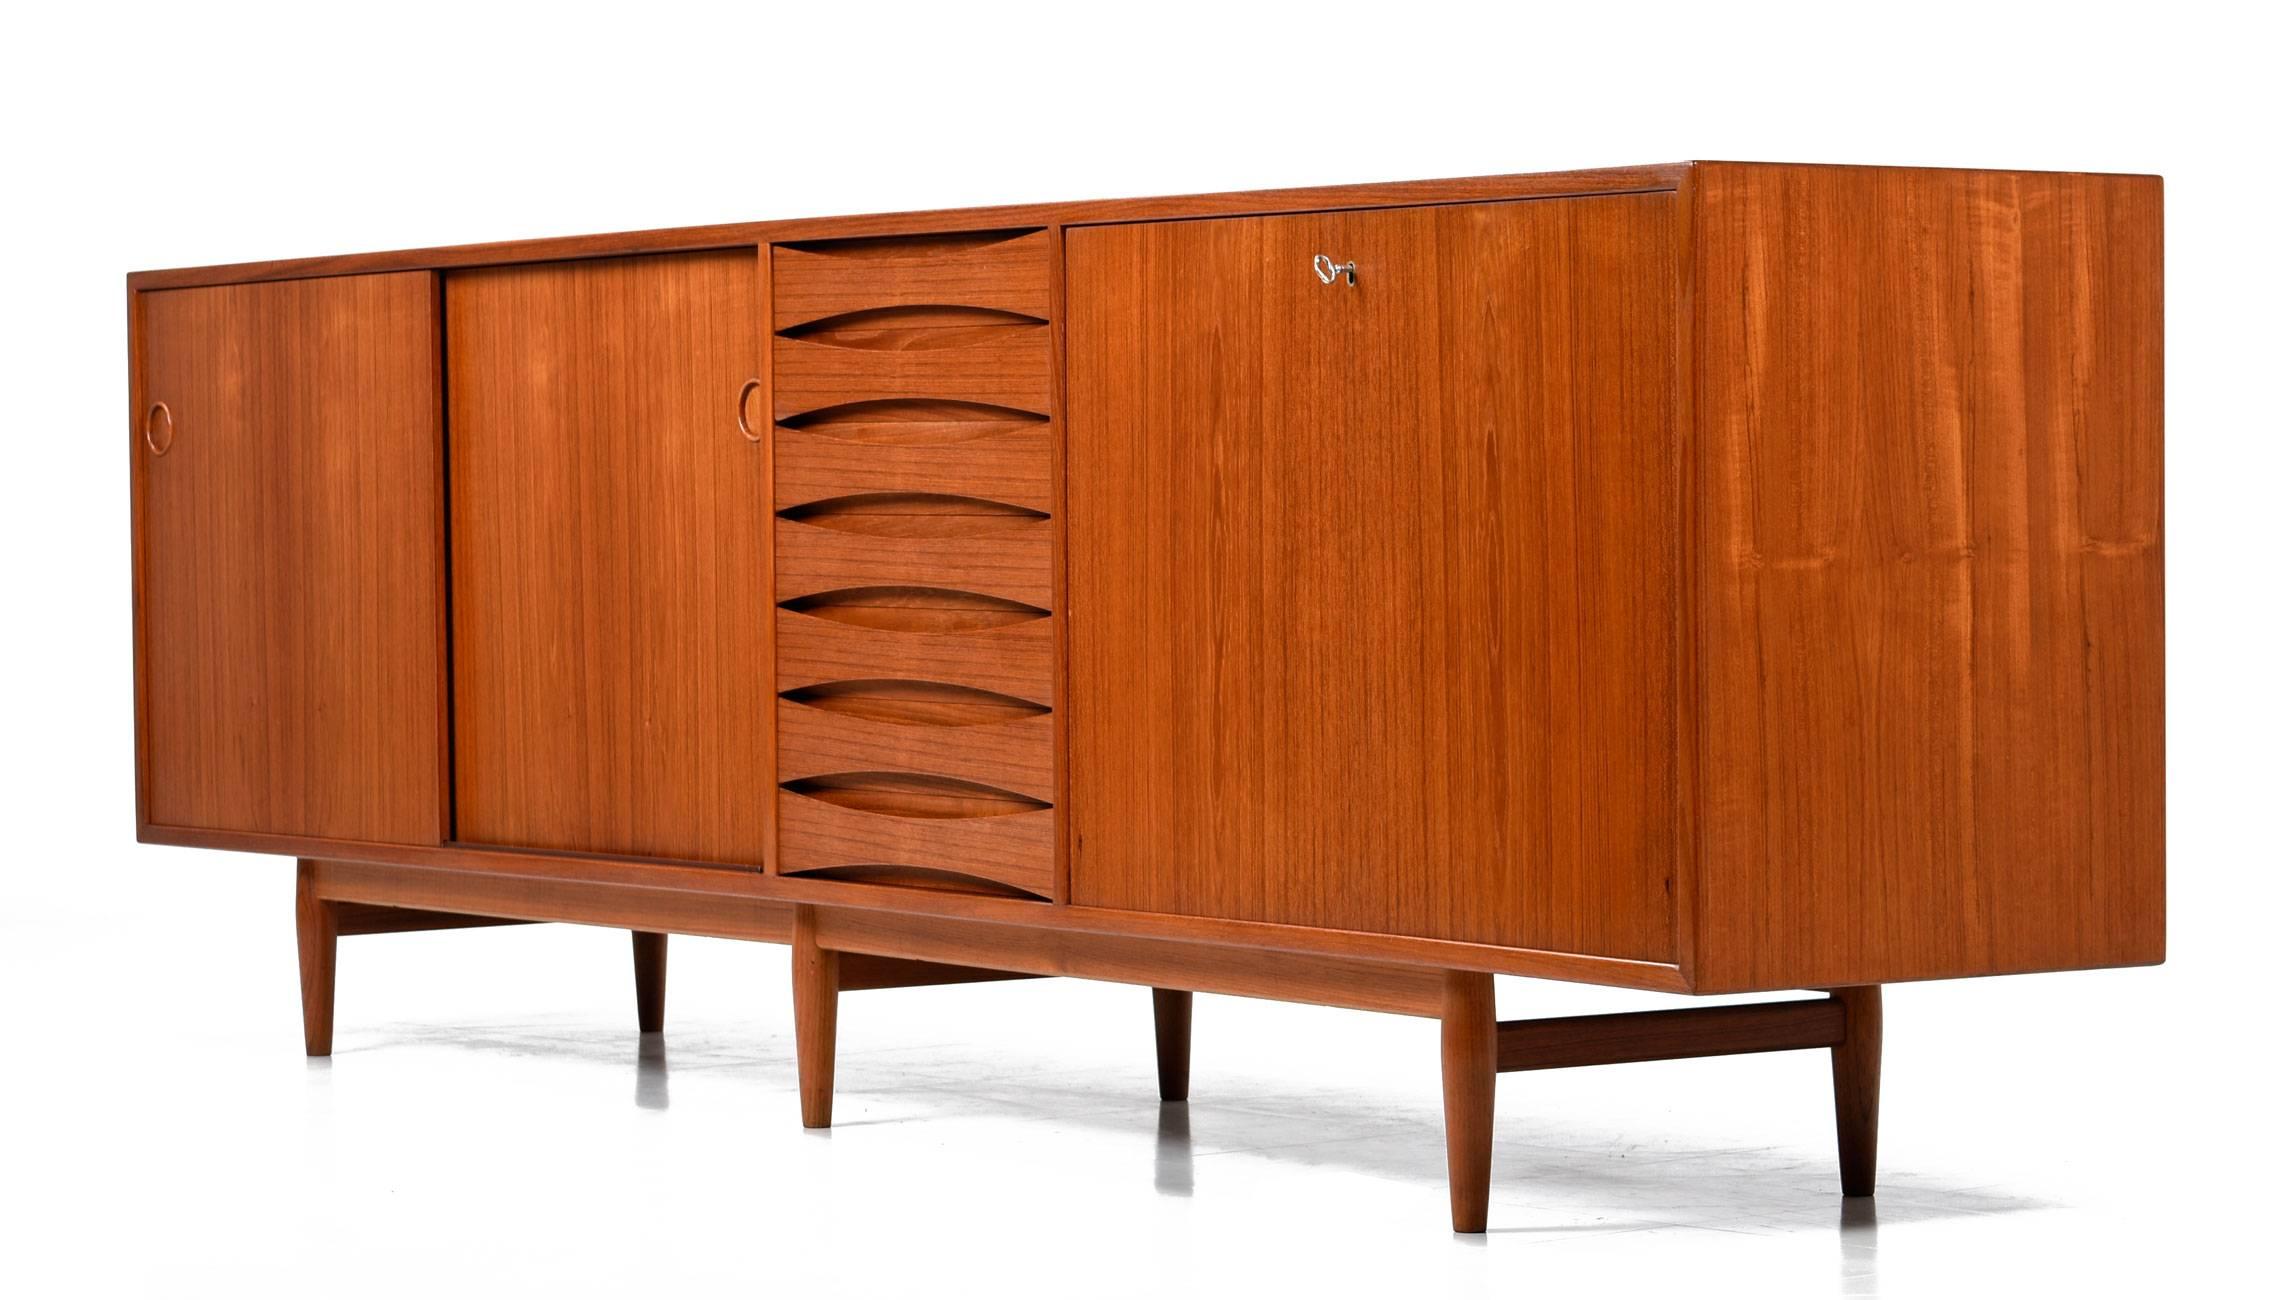 Gorgeous Arne Vodder teak credenza model 29A for Sibast Mobler, circa 1950s. This iconic and impressive, 8' long sideboard features exquisite craftsmanship, clean architectural lines, solid teak recessed concave drawer pulls, and a finished back. It